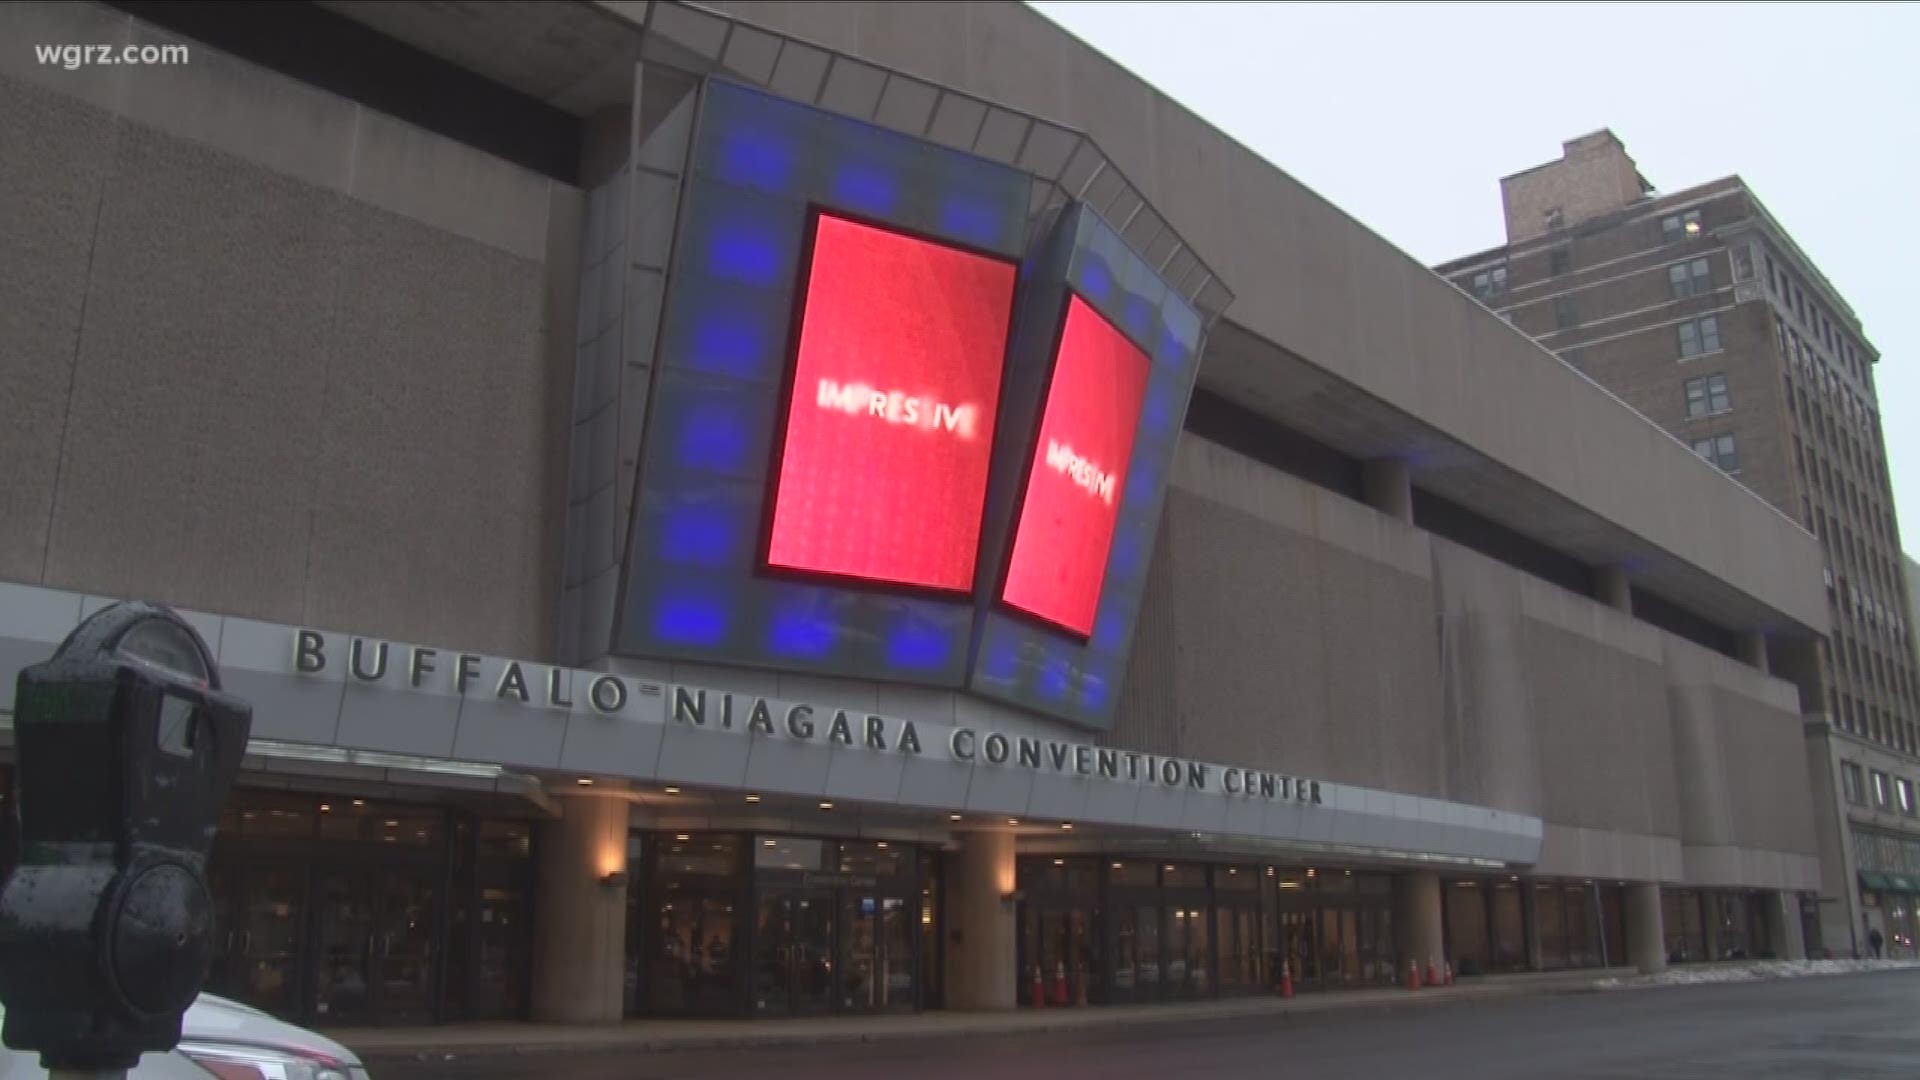 What's Next For Buffalo's Convention Center?